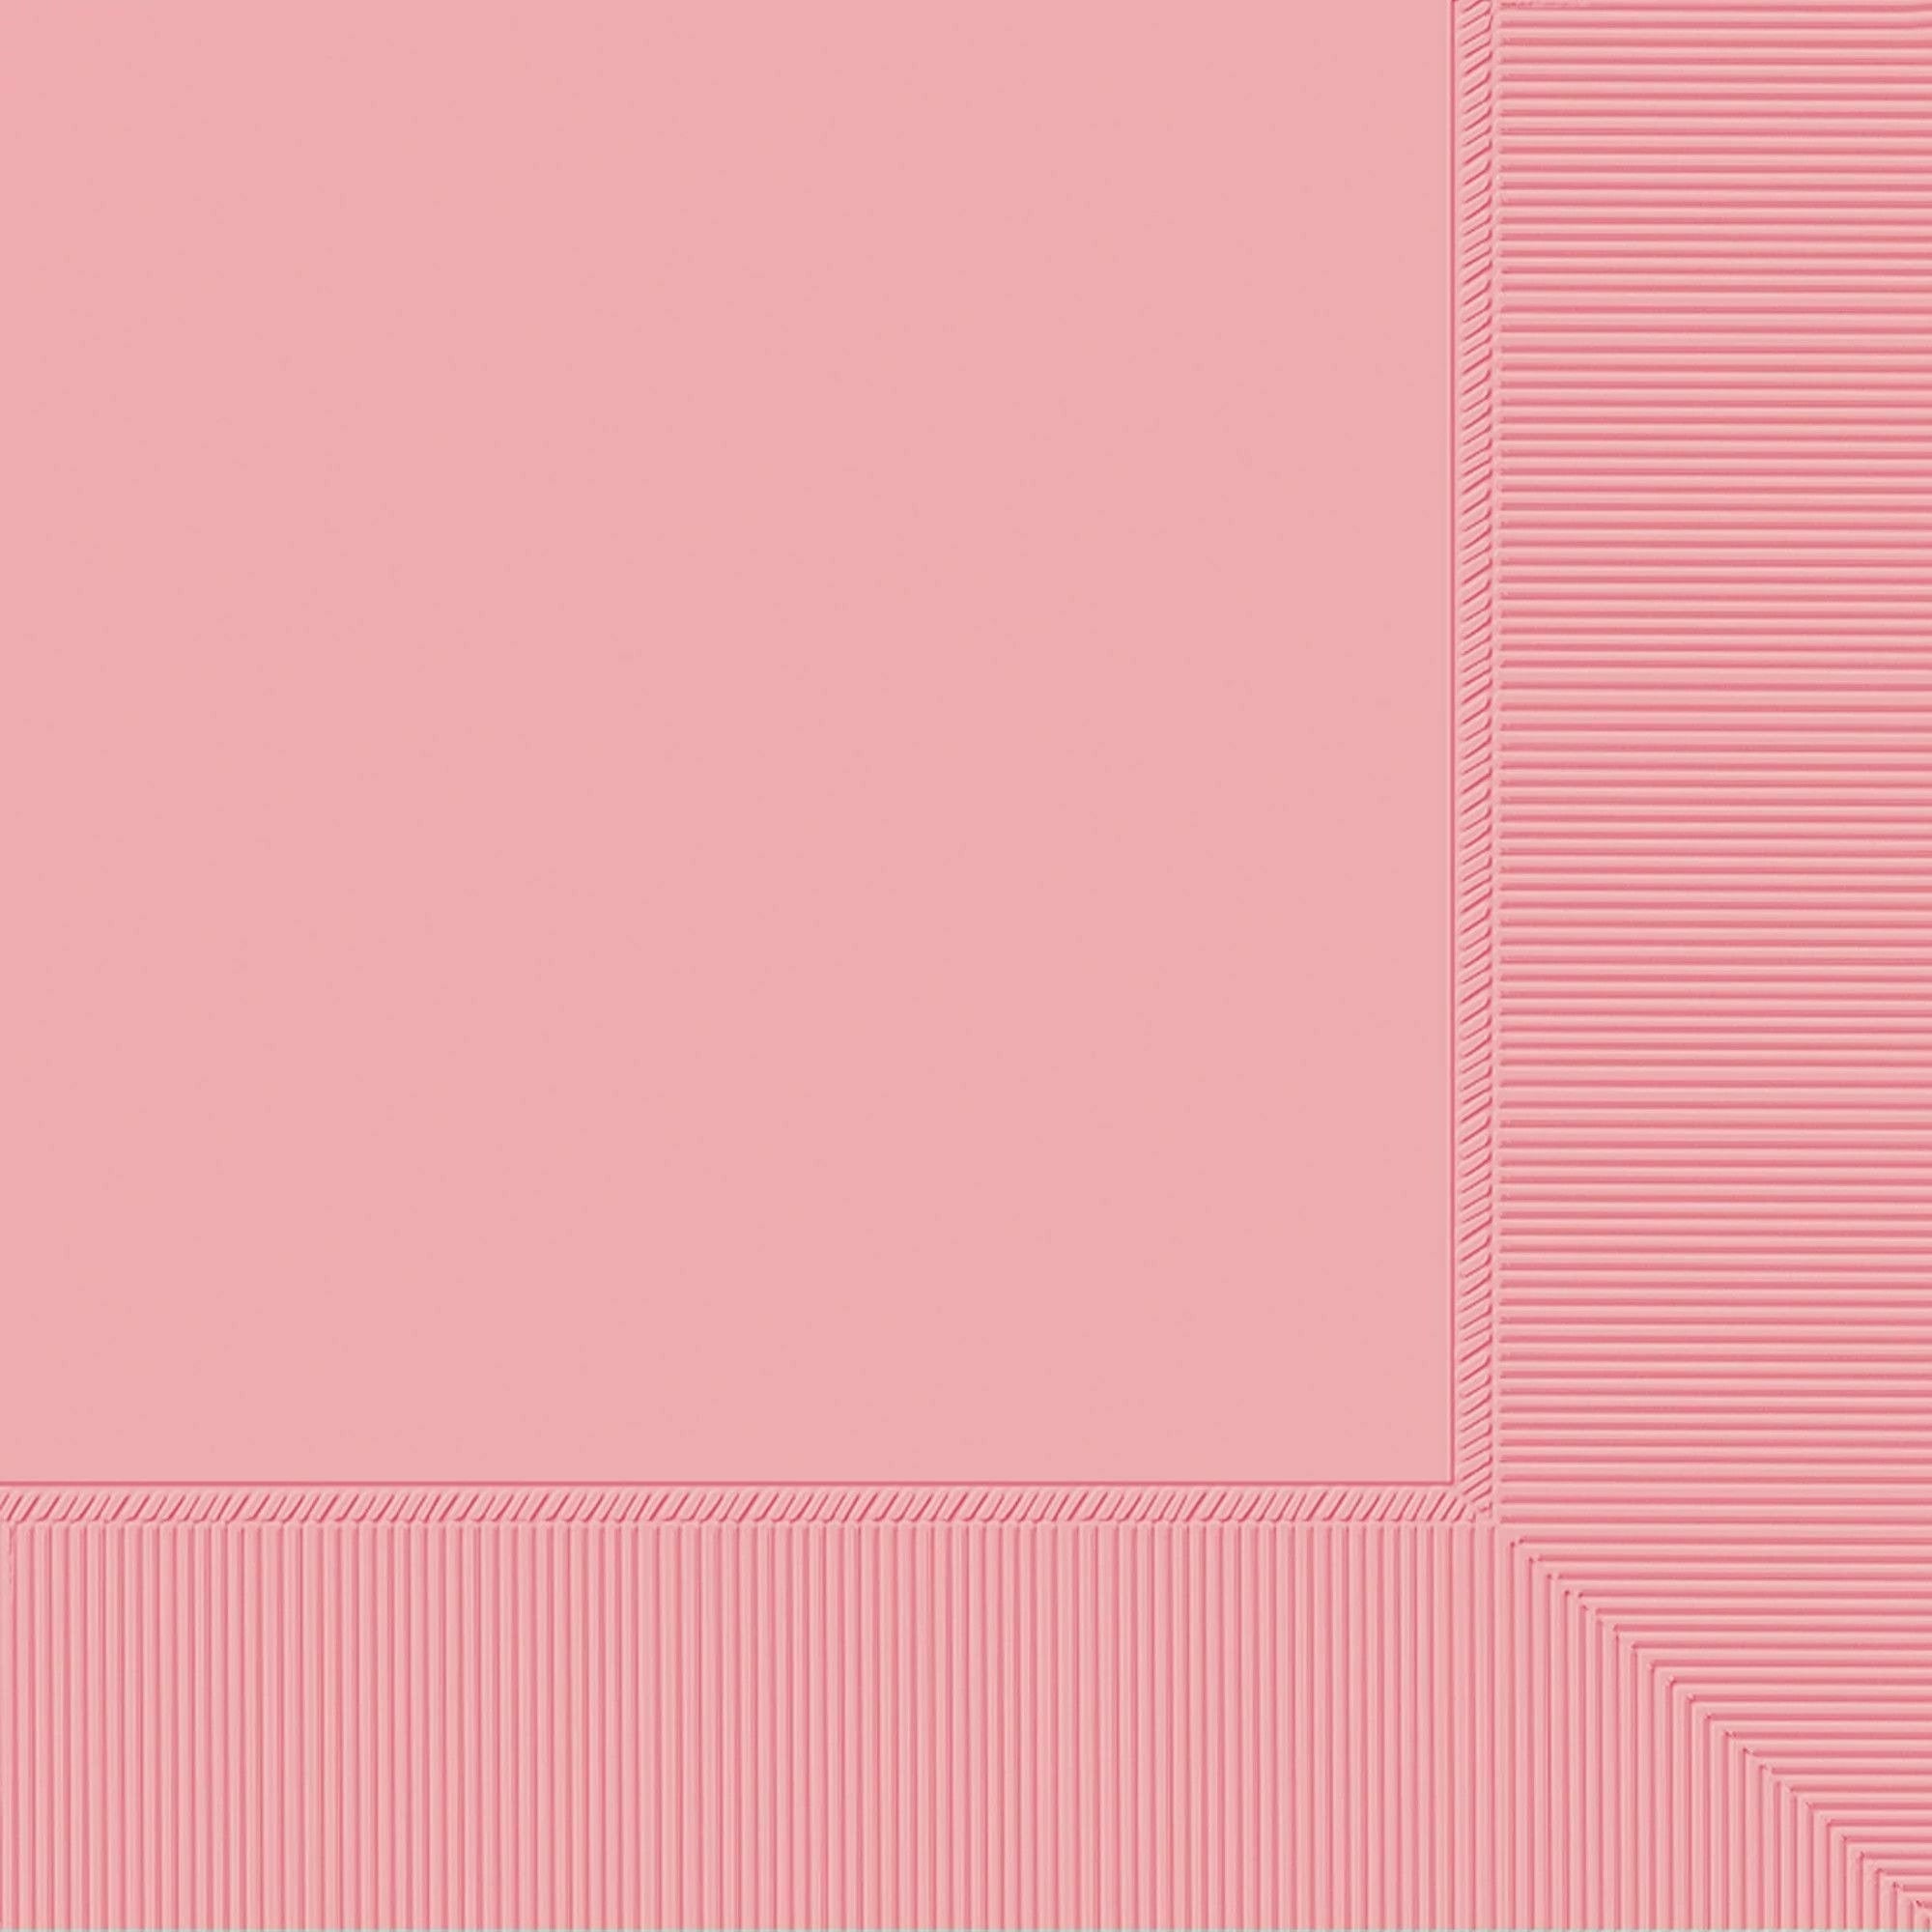 Amscan BASIC New Pink - Luncheon Napkins, 40 Ct.